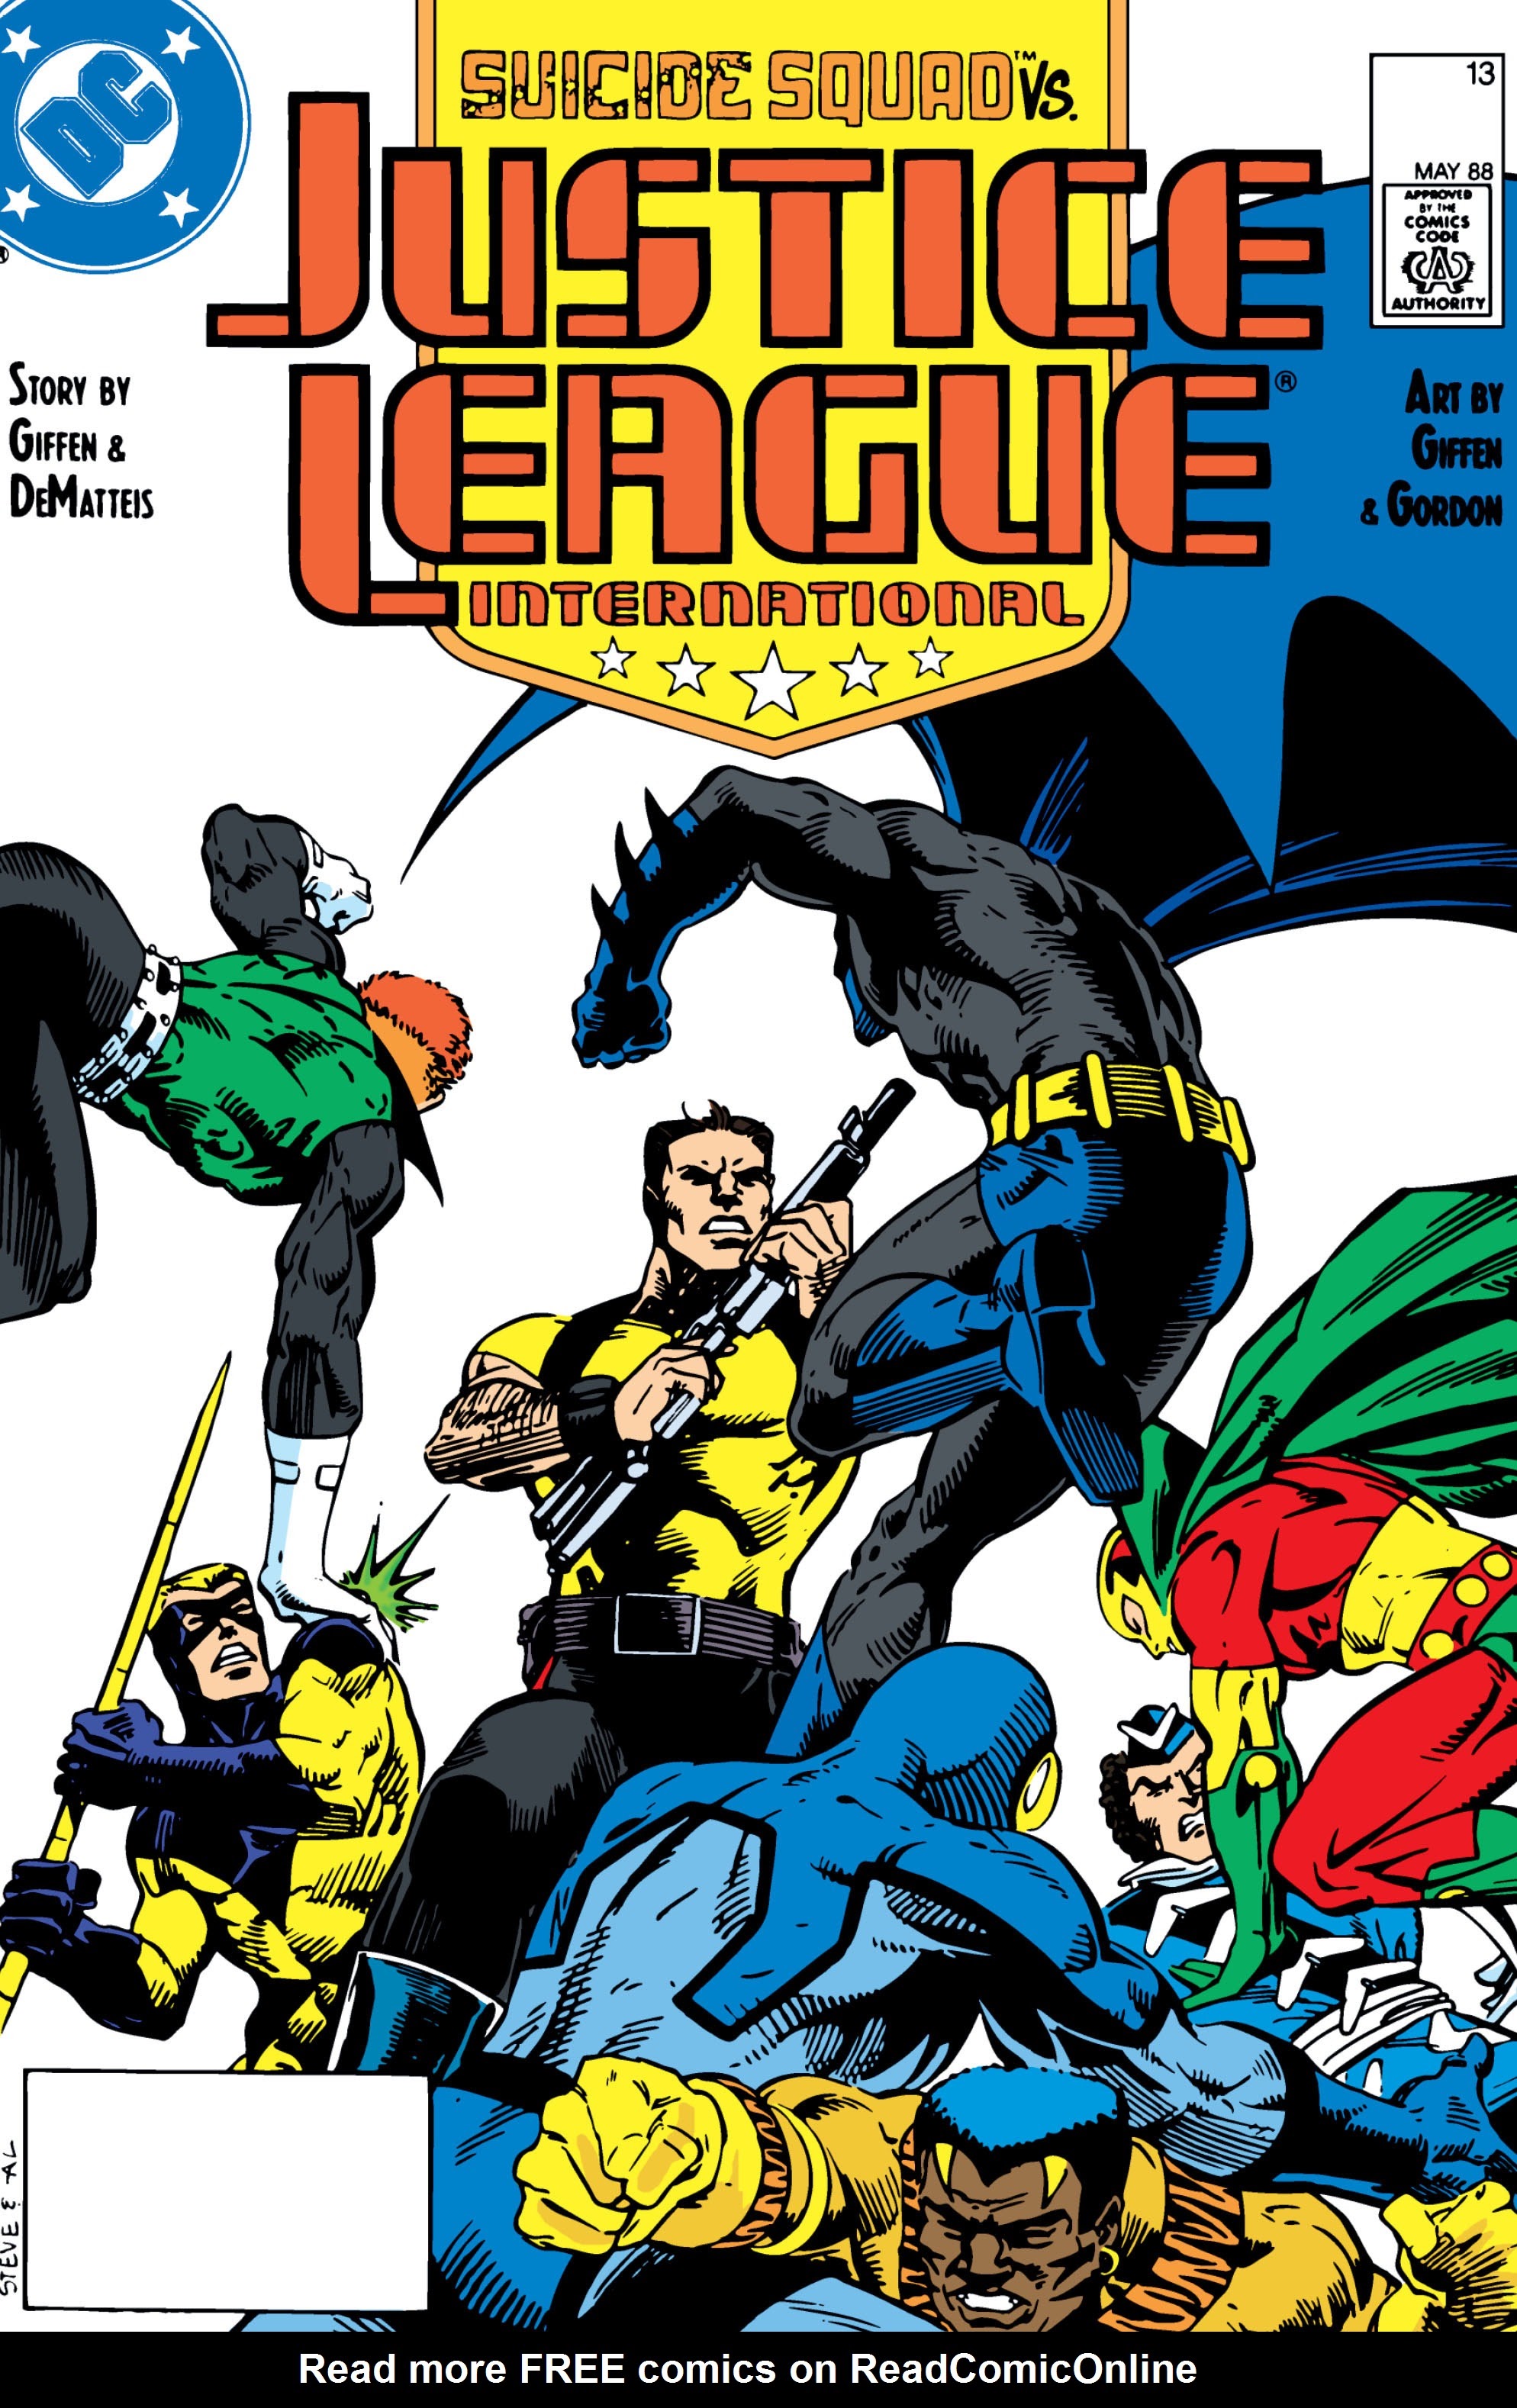 Read online Justice League International (1987) comic -  Issue #13 - 1